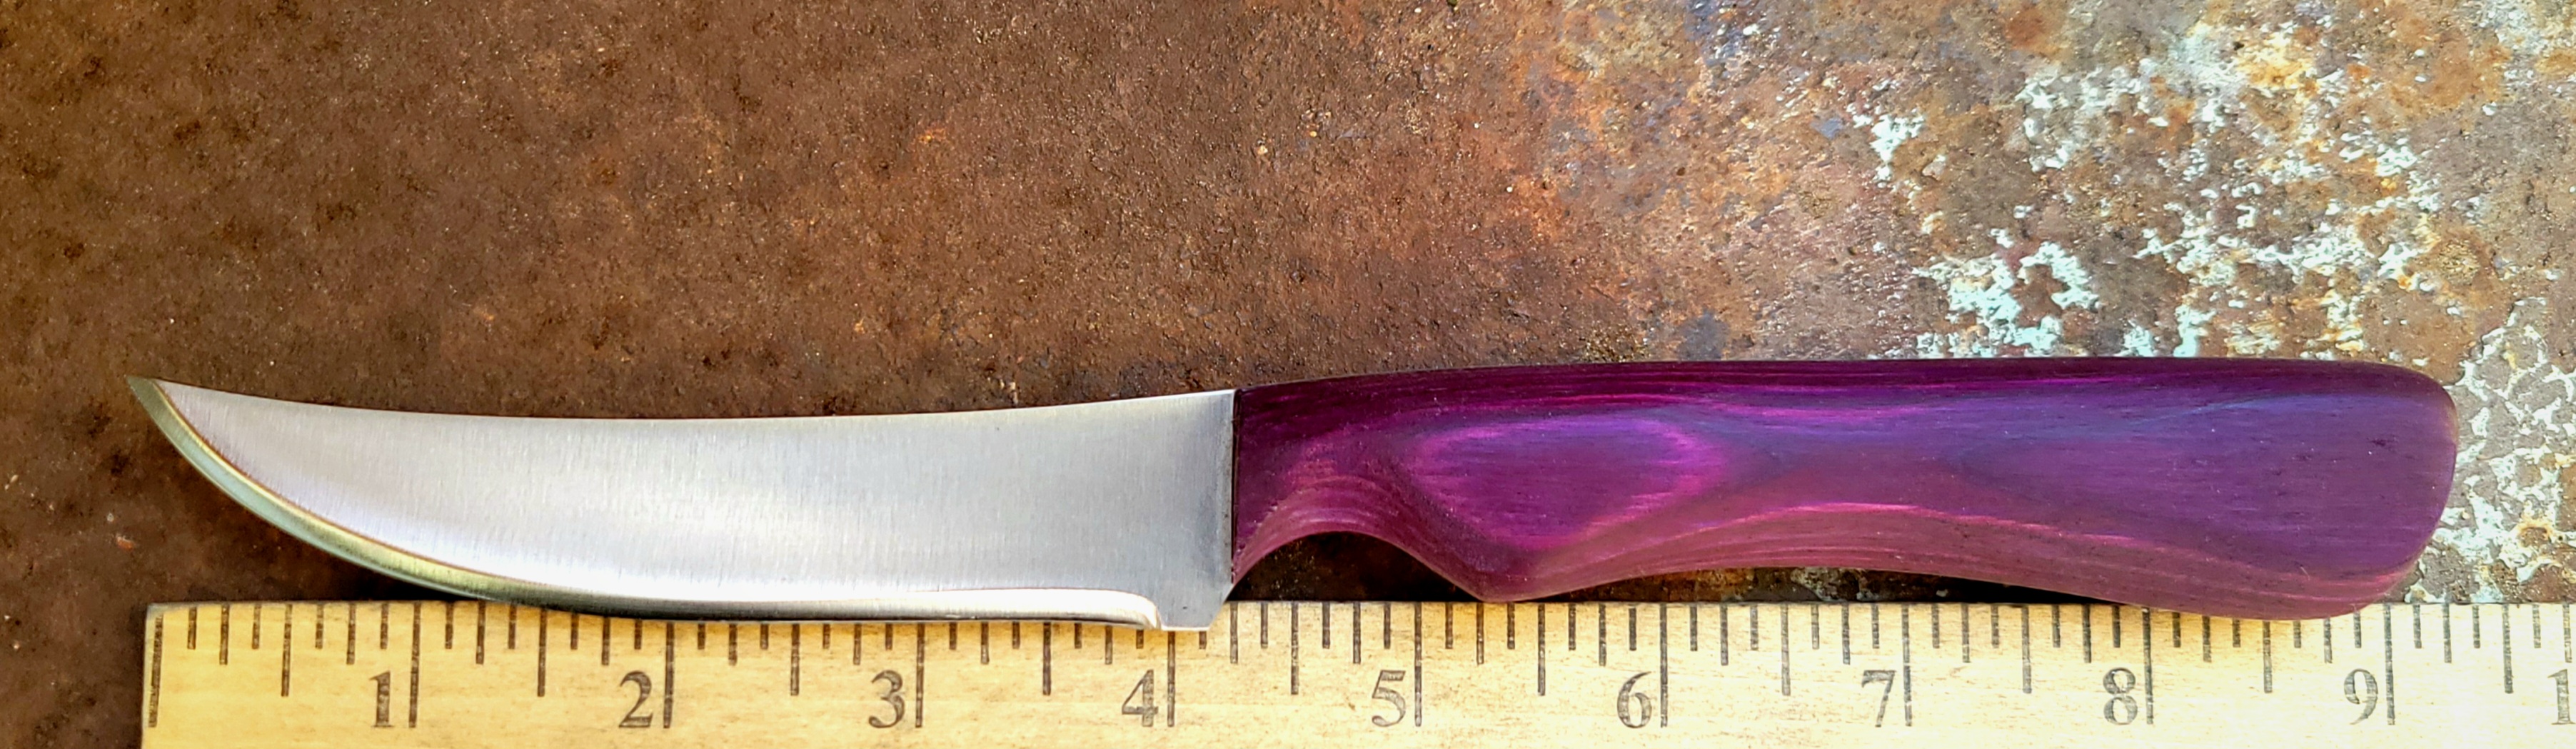 SALE! TB-THIN BLADE-PURPLE (FILLET MATERIAL)